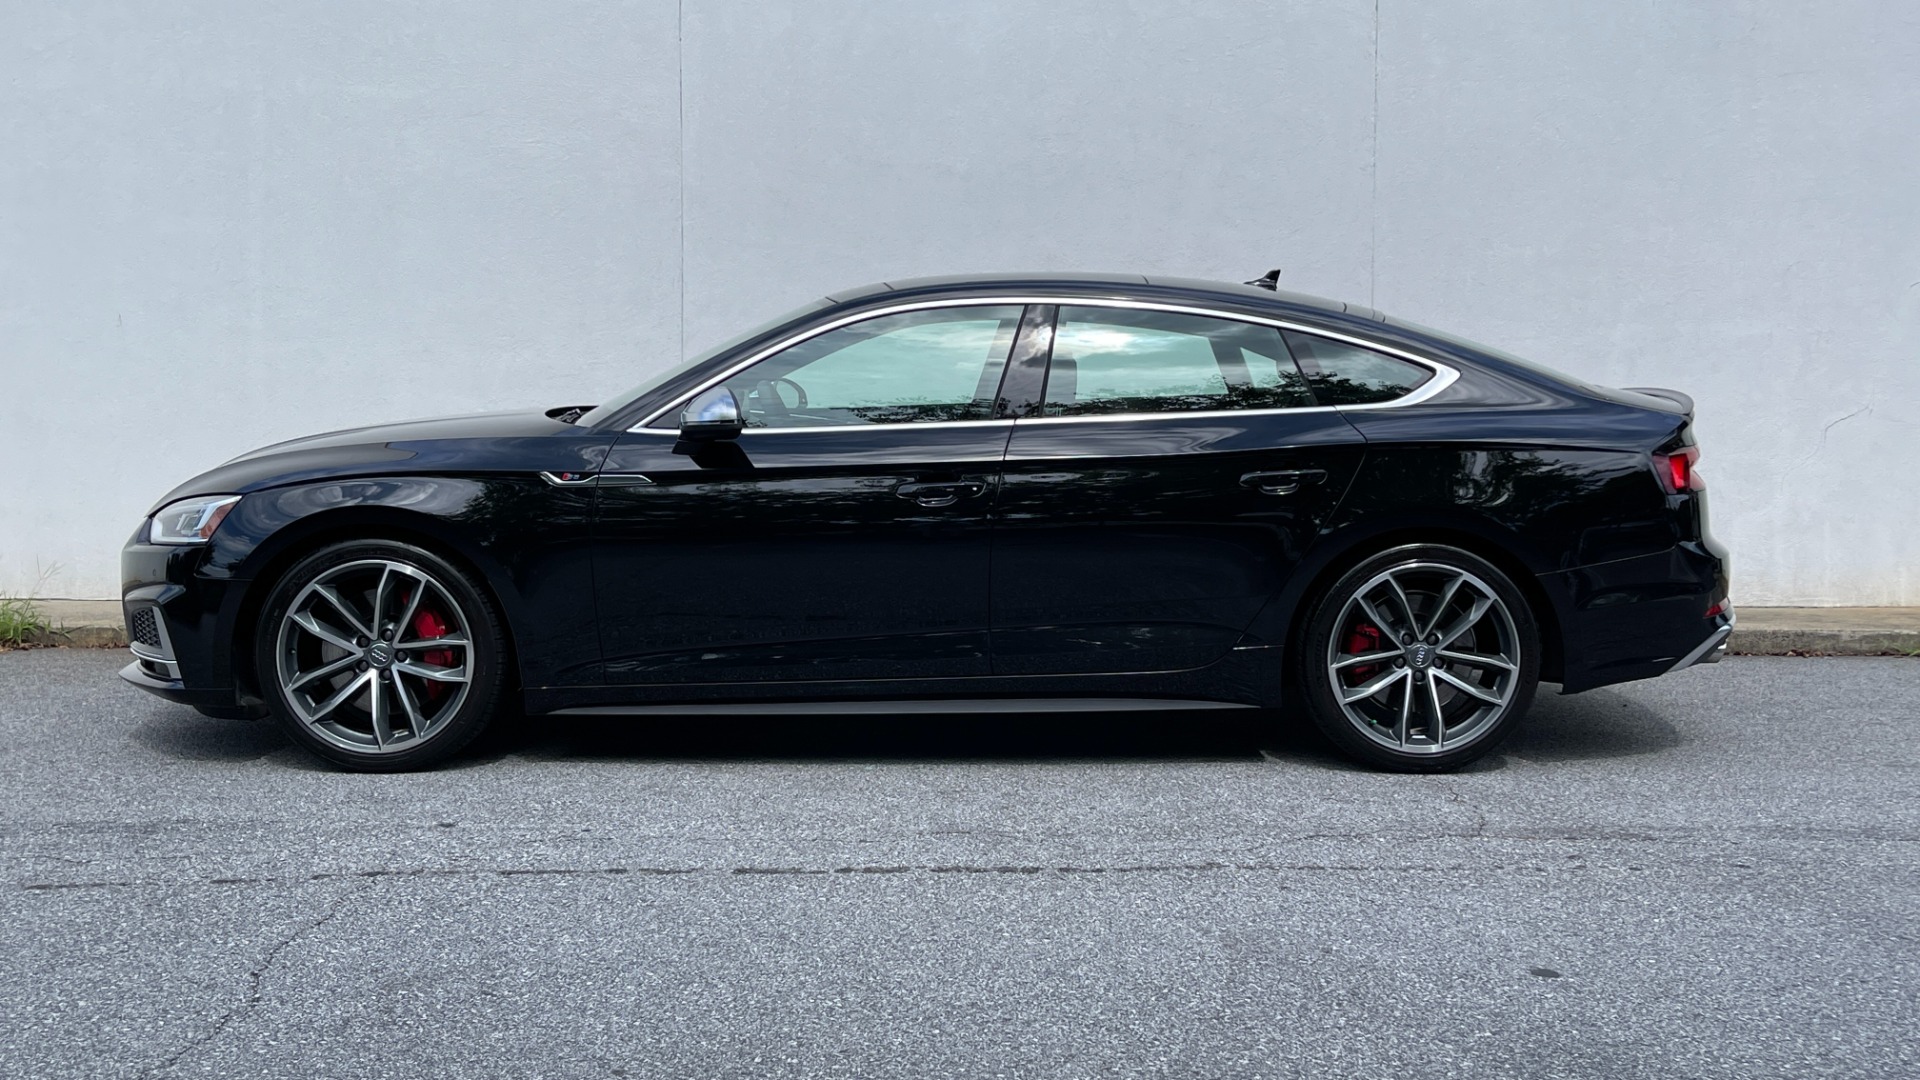 Used 2018 Audi S5 Sportback PRESTIGE / WARM WEATHER / S SPORT / 19IN WHEELS for sale Sold at Formula Imports in Charlotte NC 28227 6